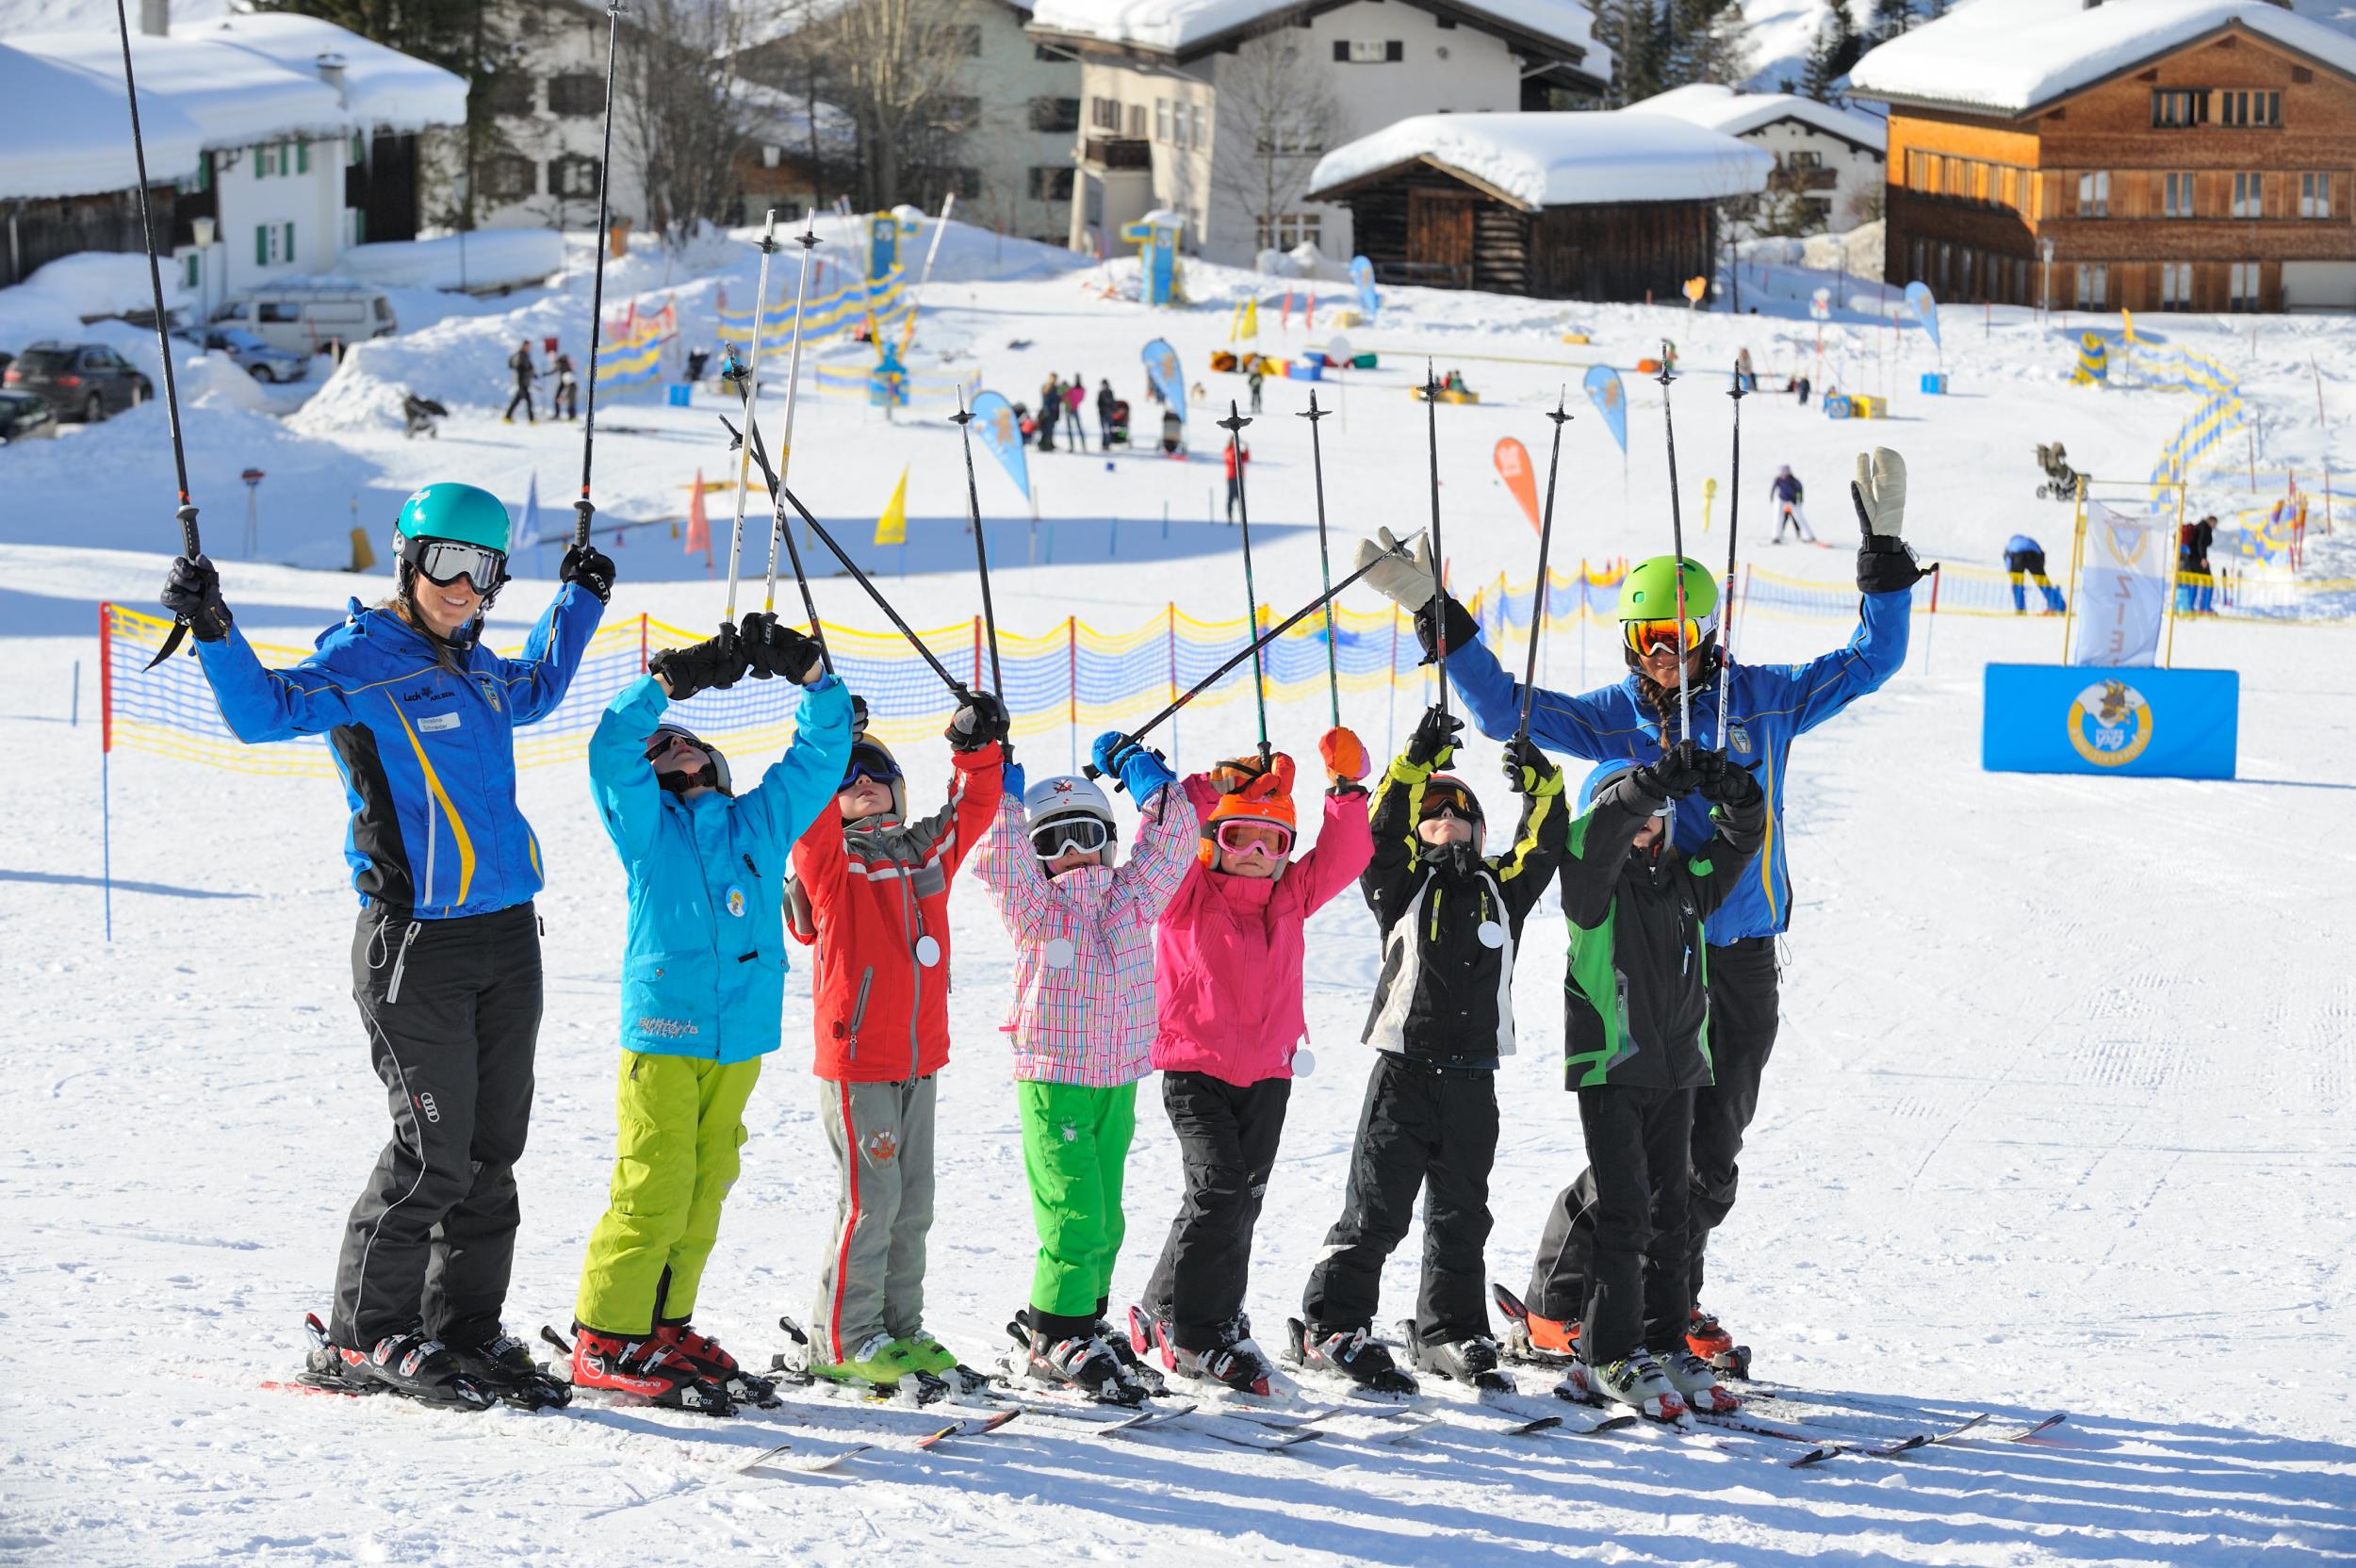 Lech has long been popular with families